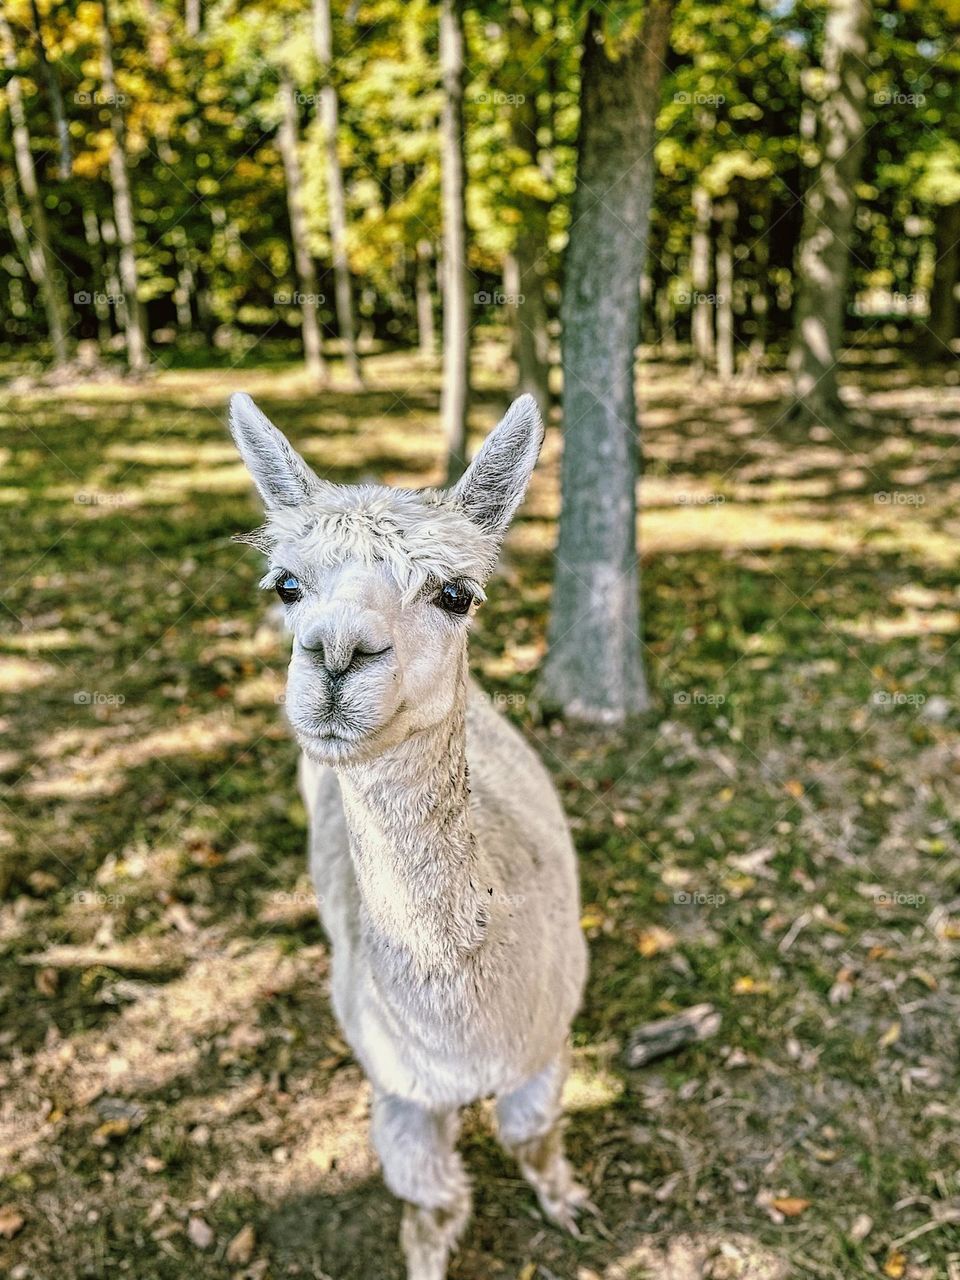 White alpaca on a farm in Ohio, friendly alpaca approaching you, alpacas in the Midwest, raised on a farm, cute farm animals, curious farm animals, smartphone photography, mobile photography, animals on the farm, fuzzy farm animals 